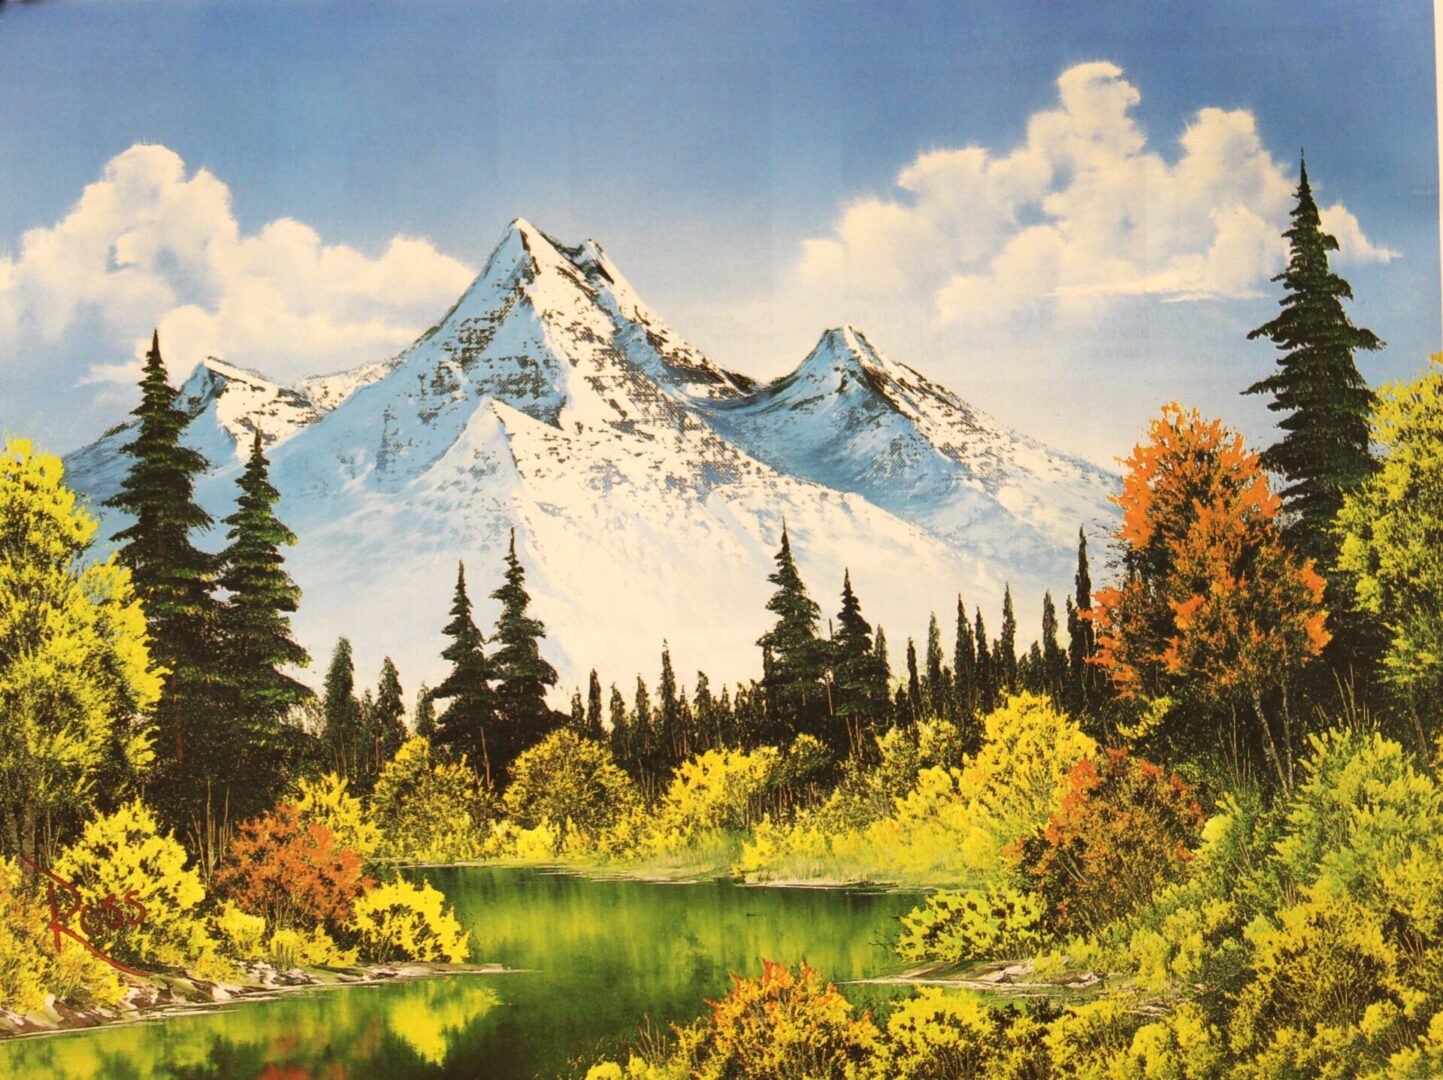 A painting of a mountain range with trees and a lake.